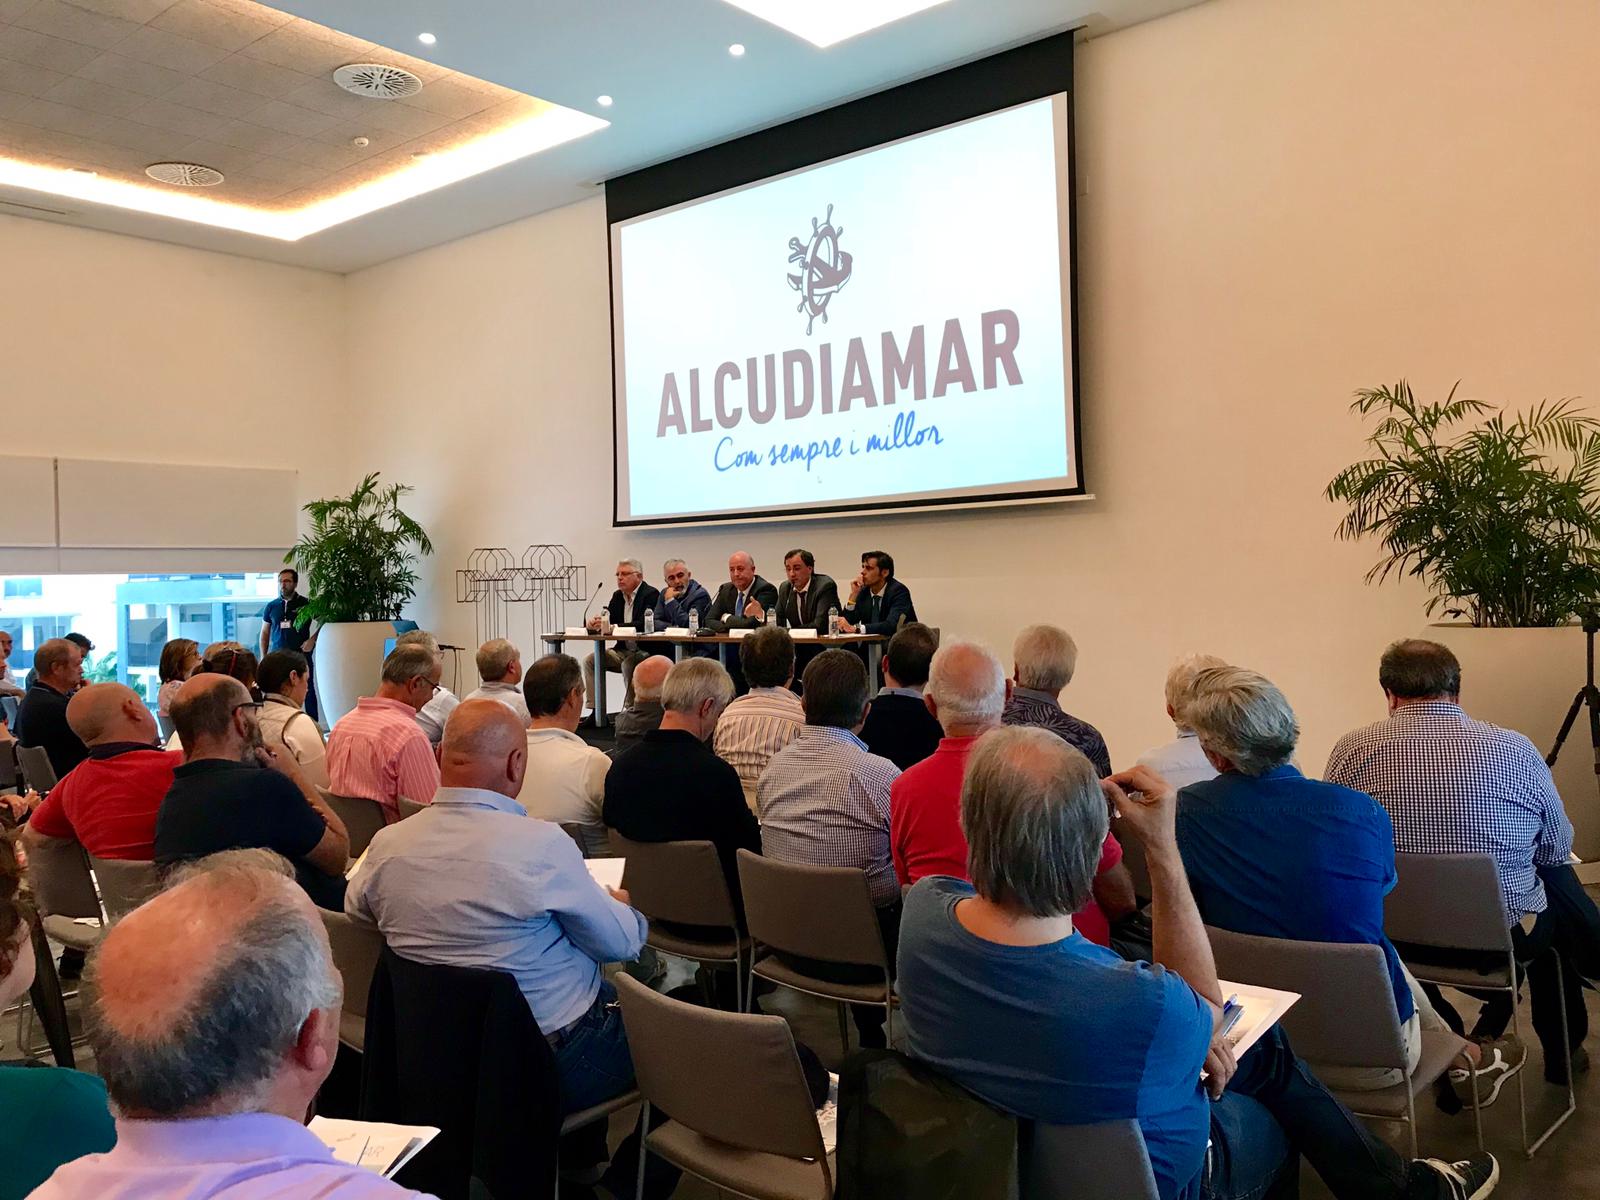 The APB assures Alcudiamar users that they can continue to use Alcudia port facilities until 2030